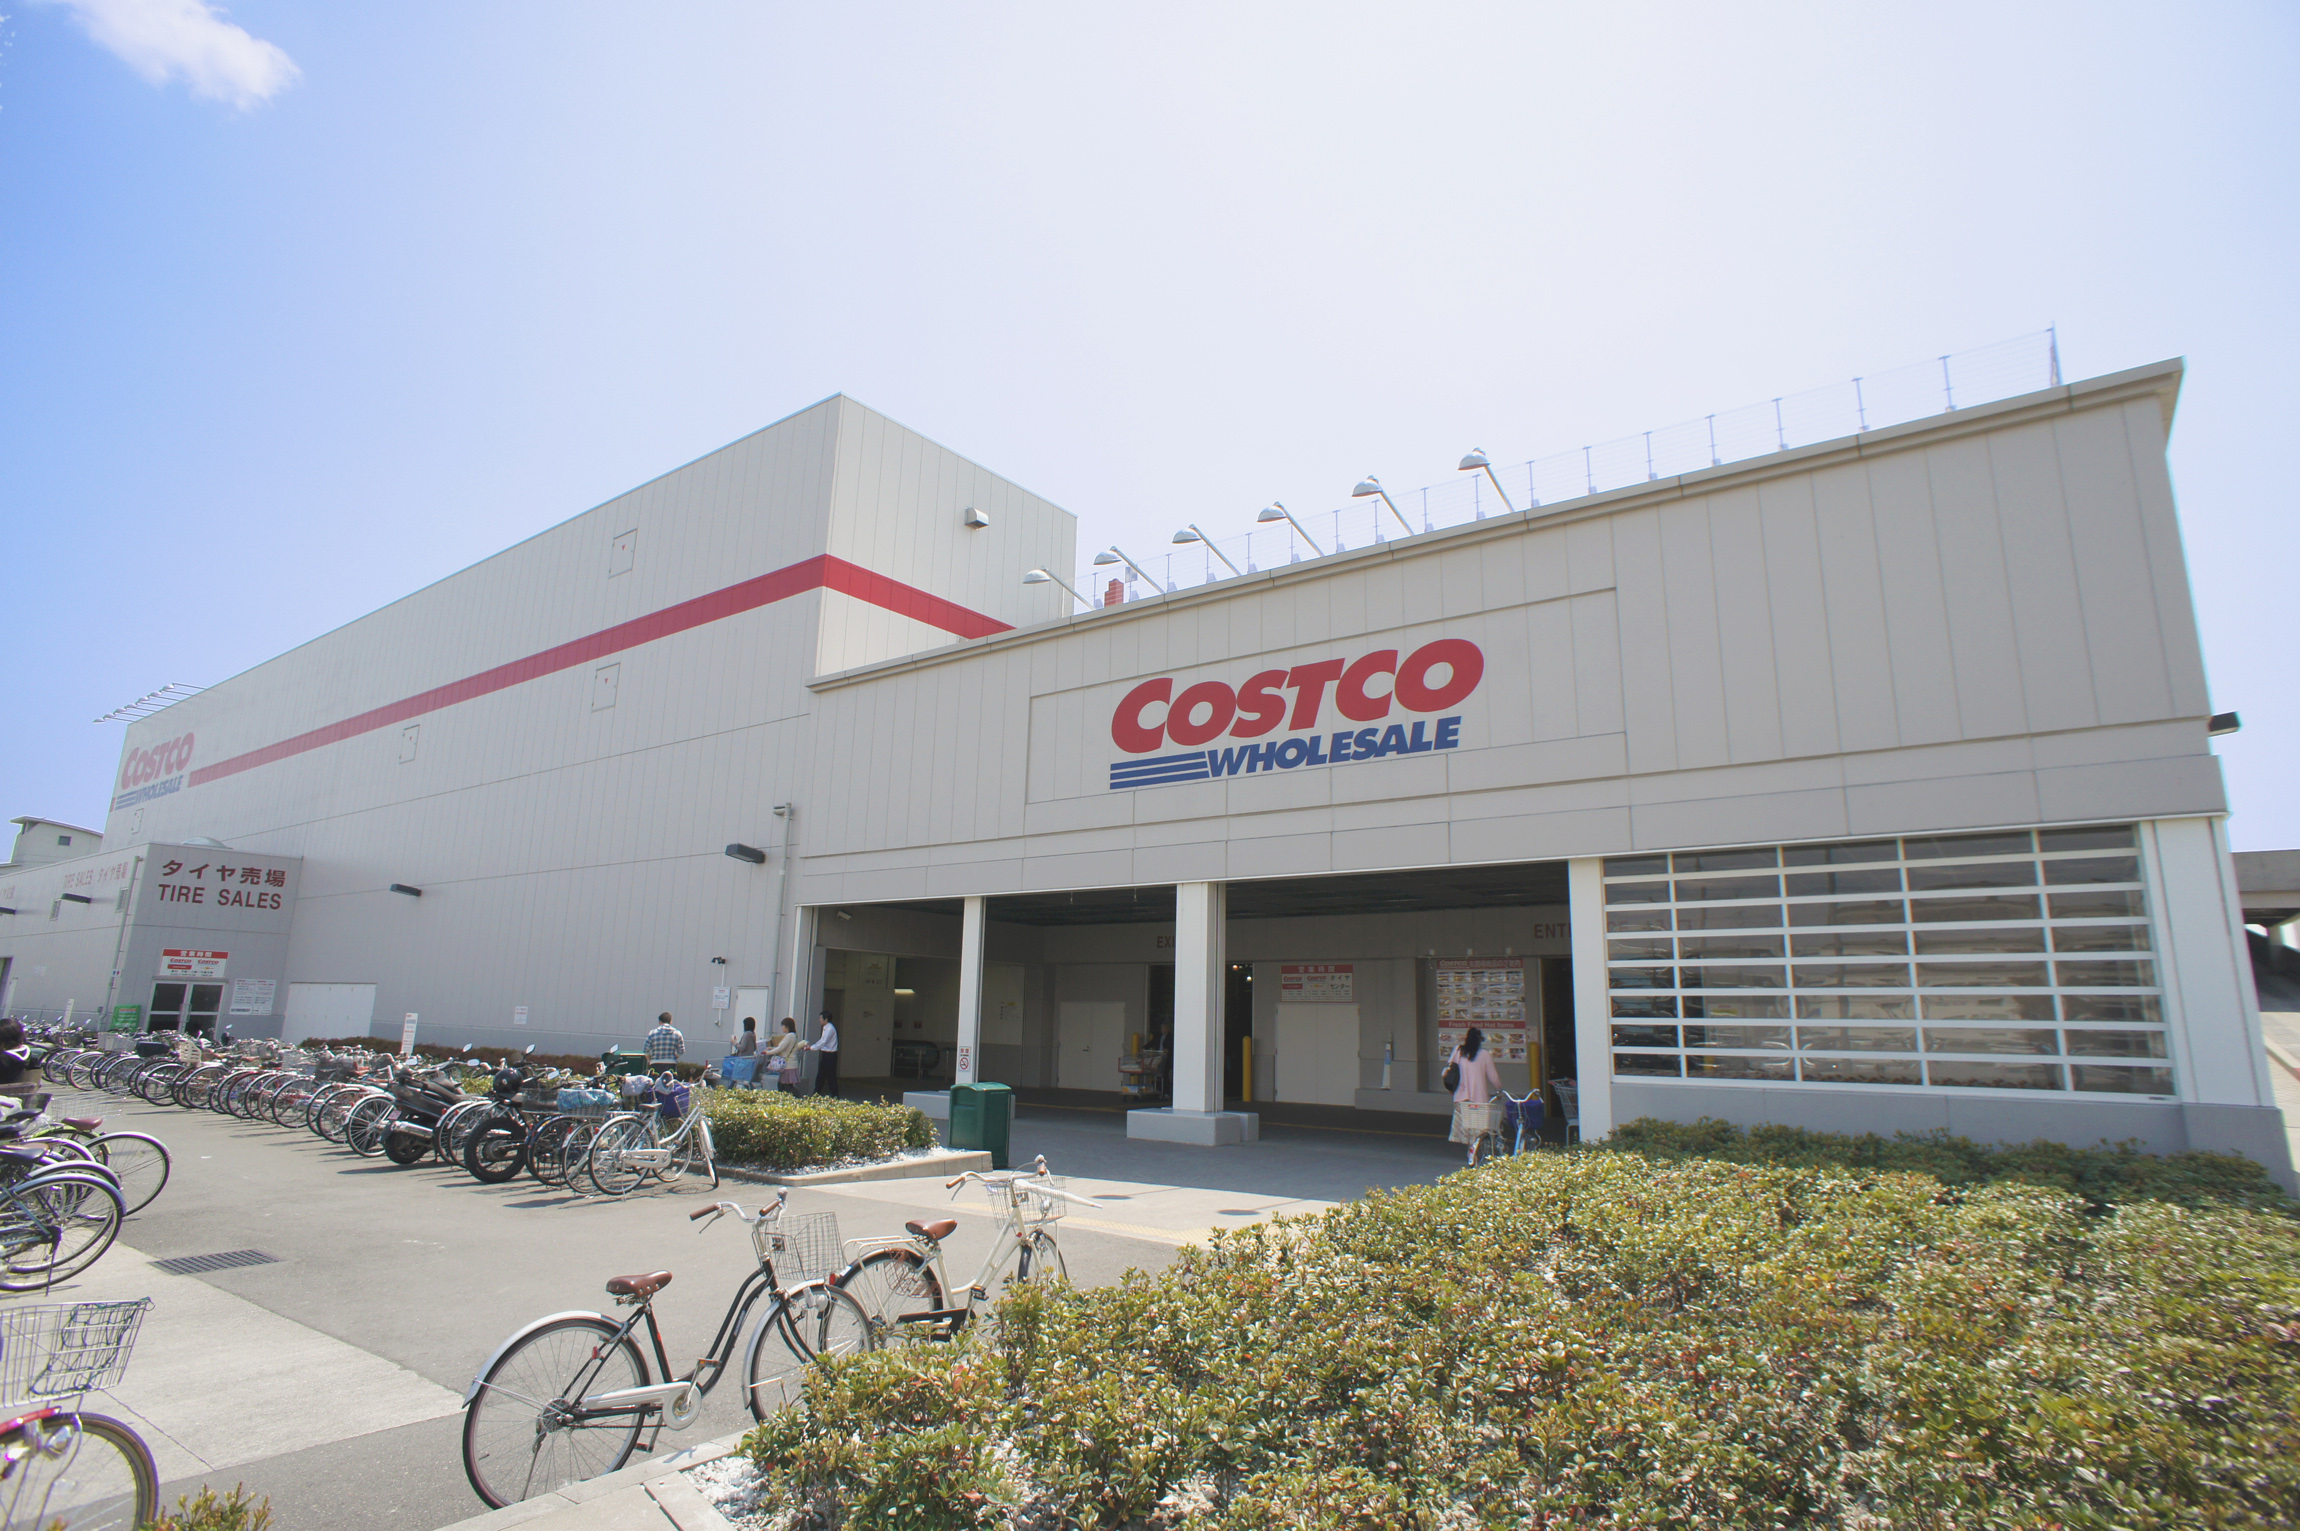 What is Costco?